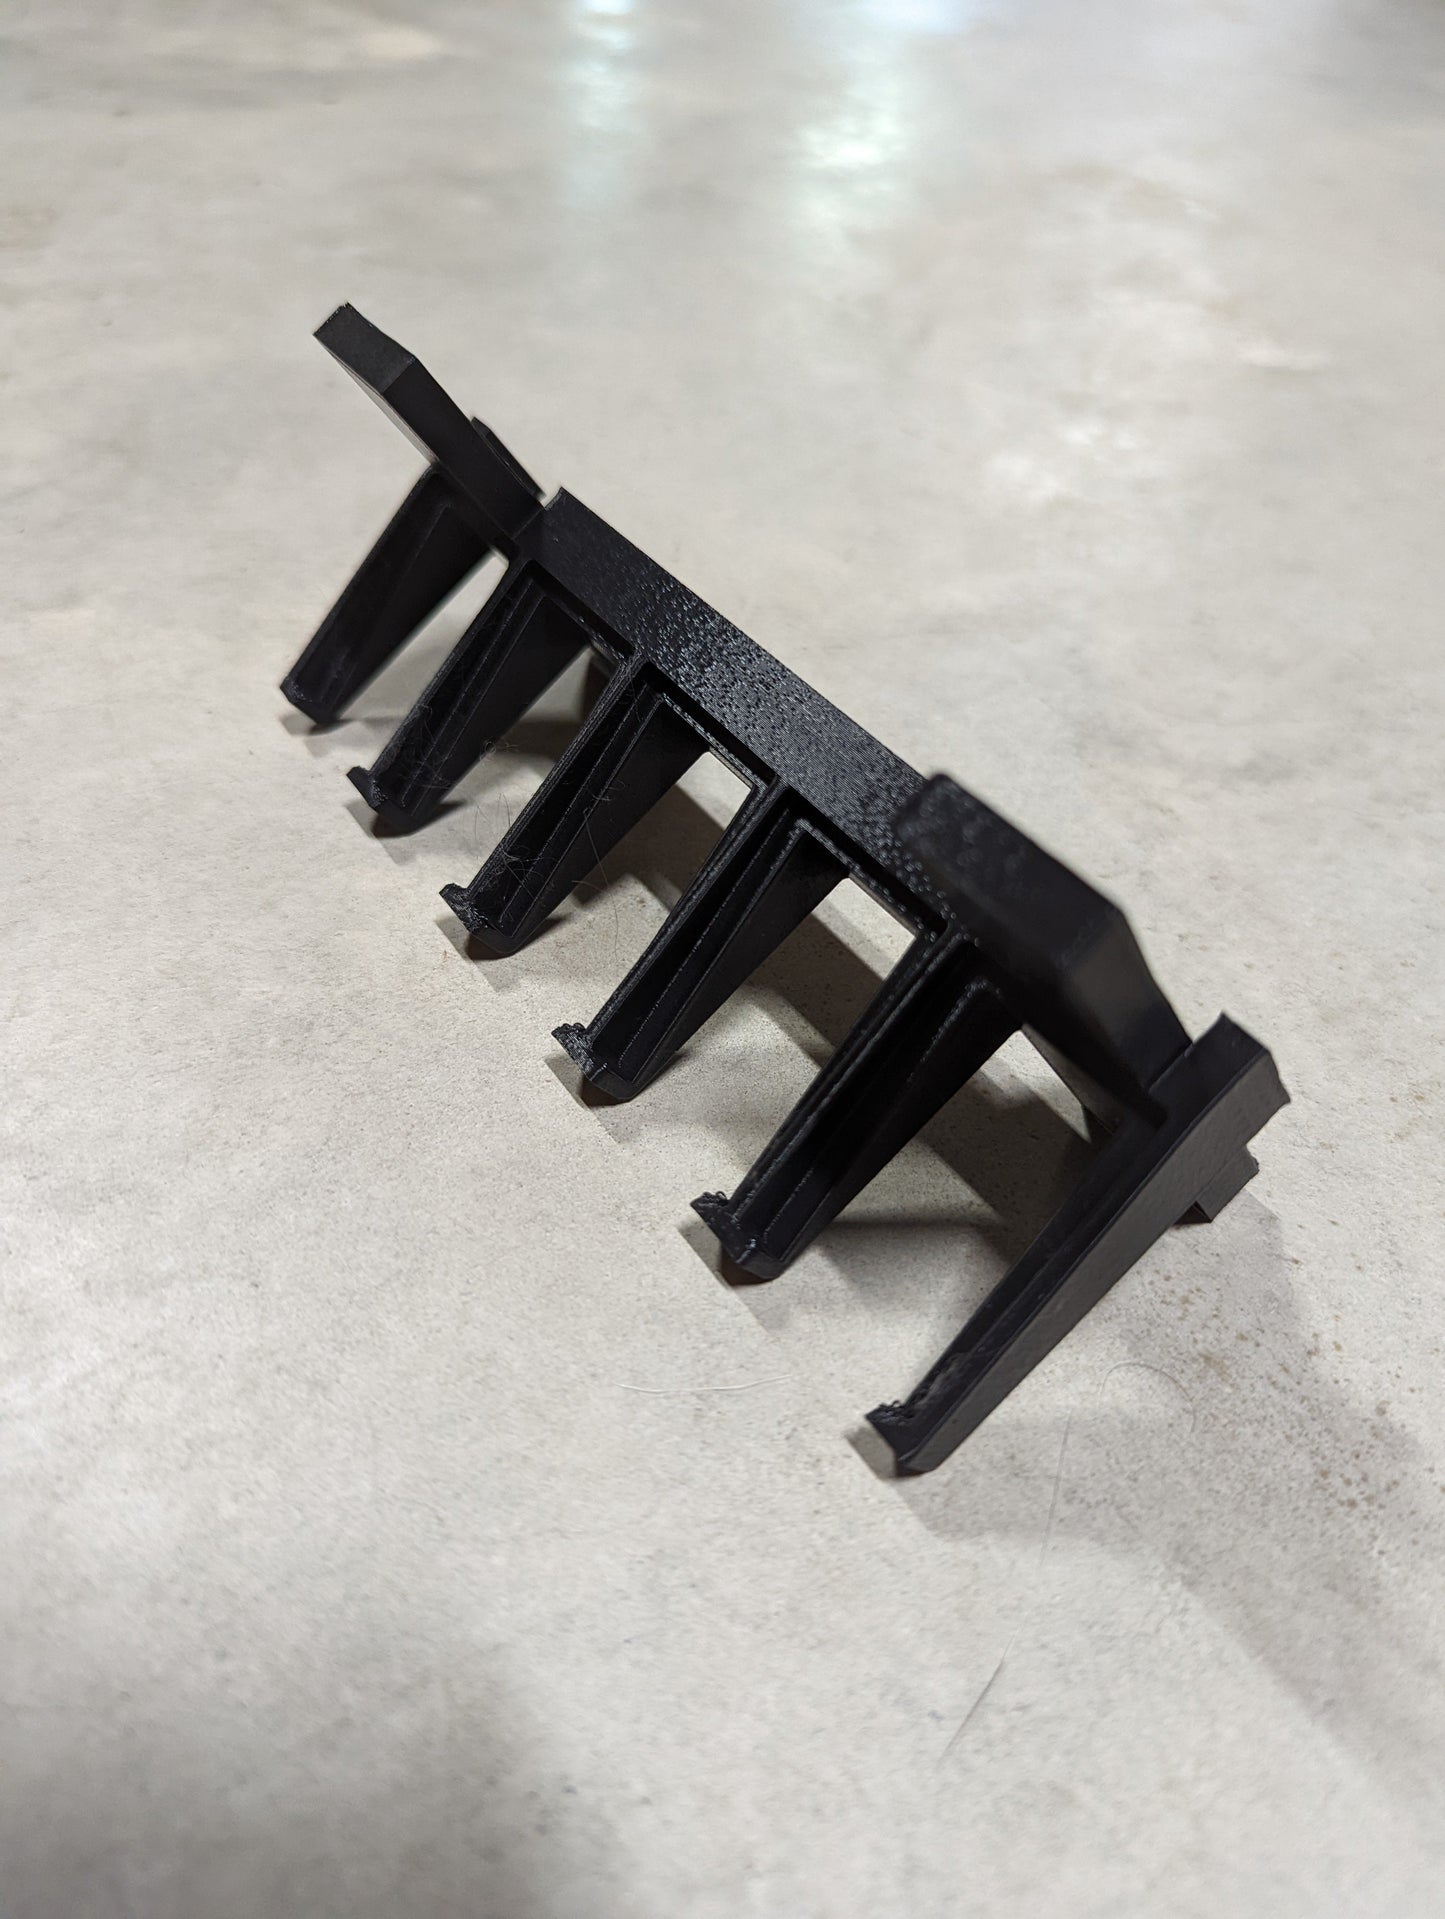 Mount for IWI Jericho 941 Mags - Command Strips | Magazine Holder Storage Rack